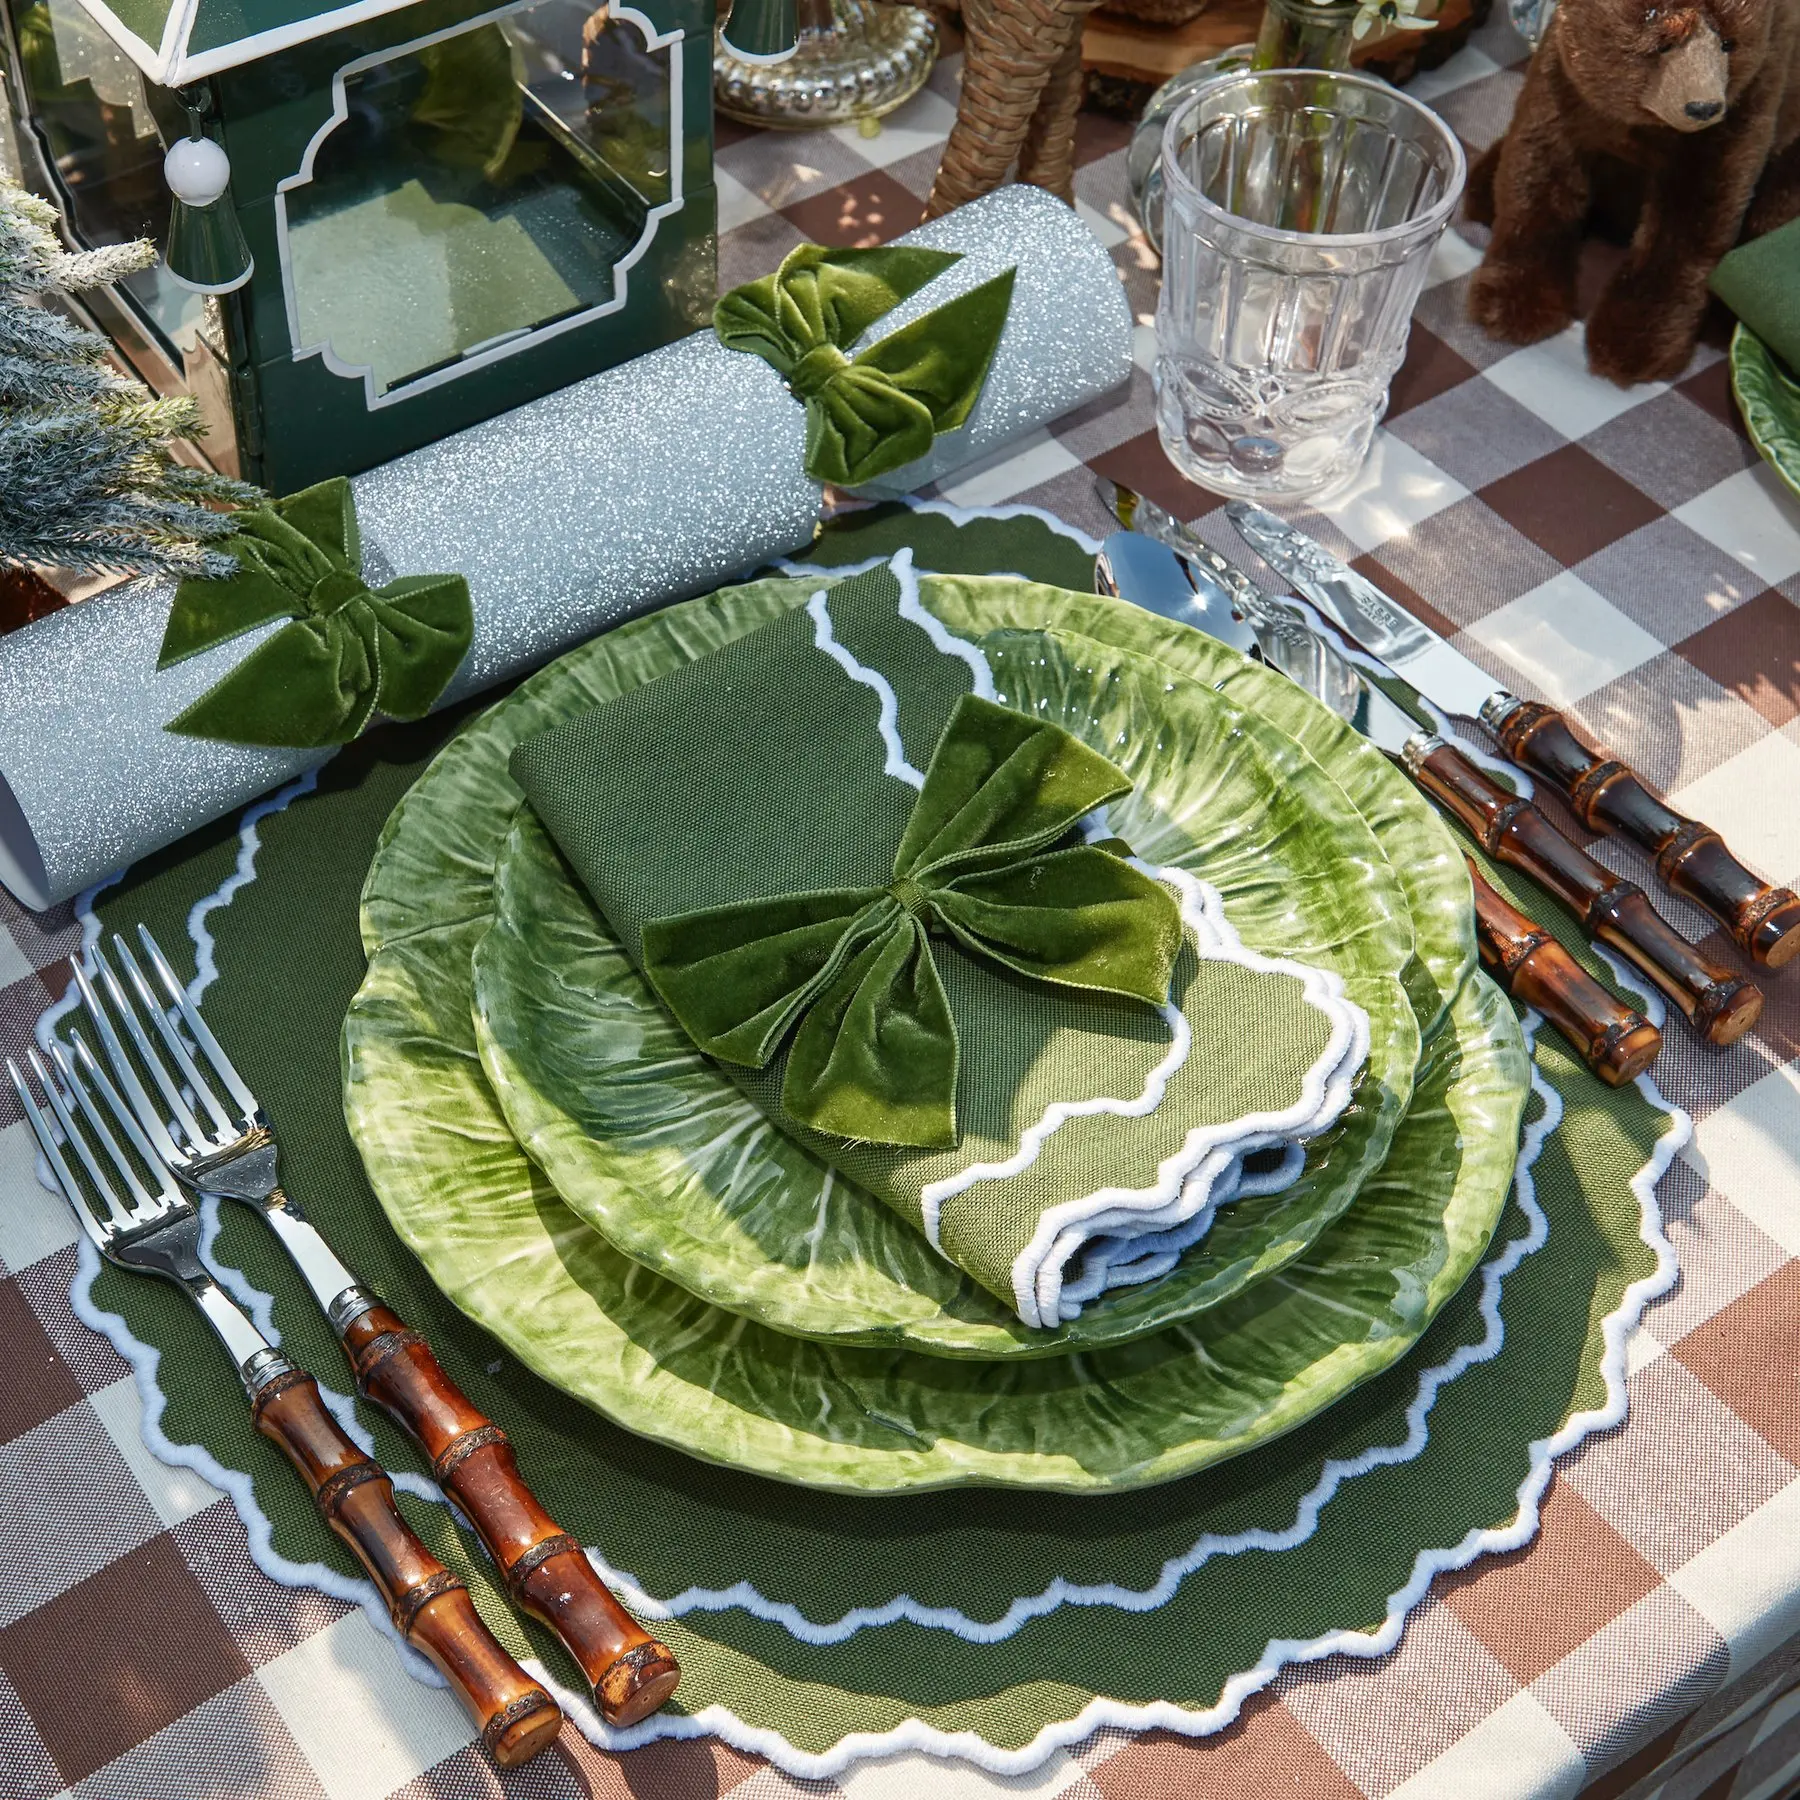 Green Placemats Napkins 12 People Set Home dining table decor placemats for table luxury home decor table cover rustic wedding